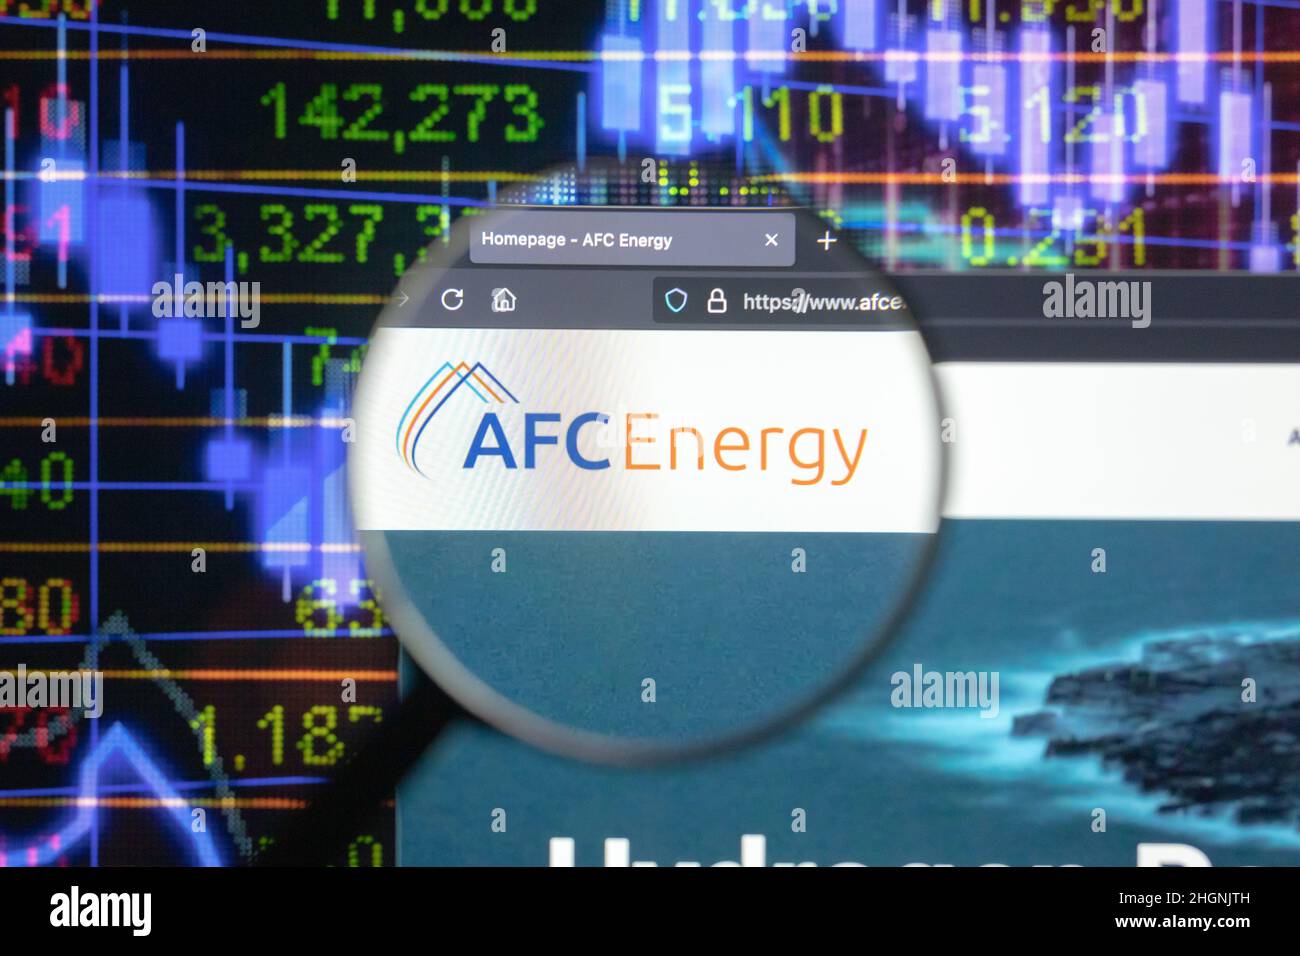 AFC Energy company logo on a website with blurry stock market developments in the background, seen on a computer screen through a magnifying glass. Stock Photo